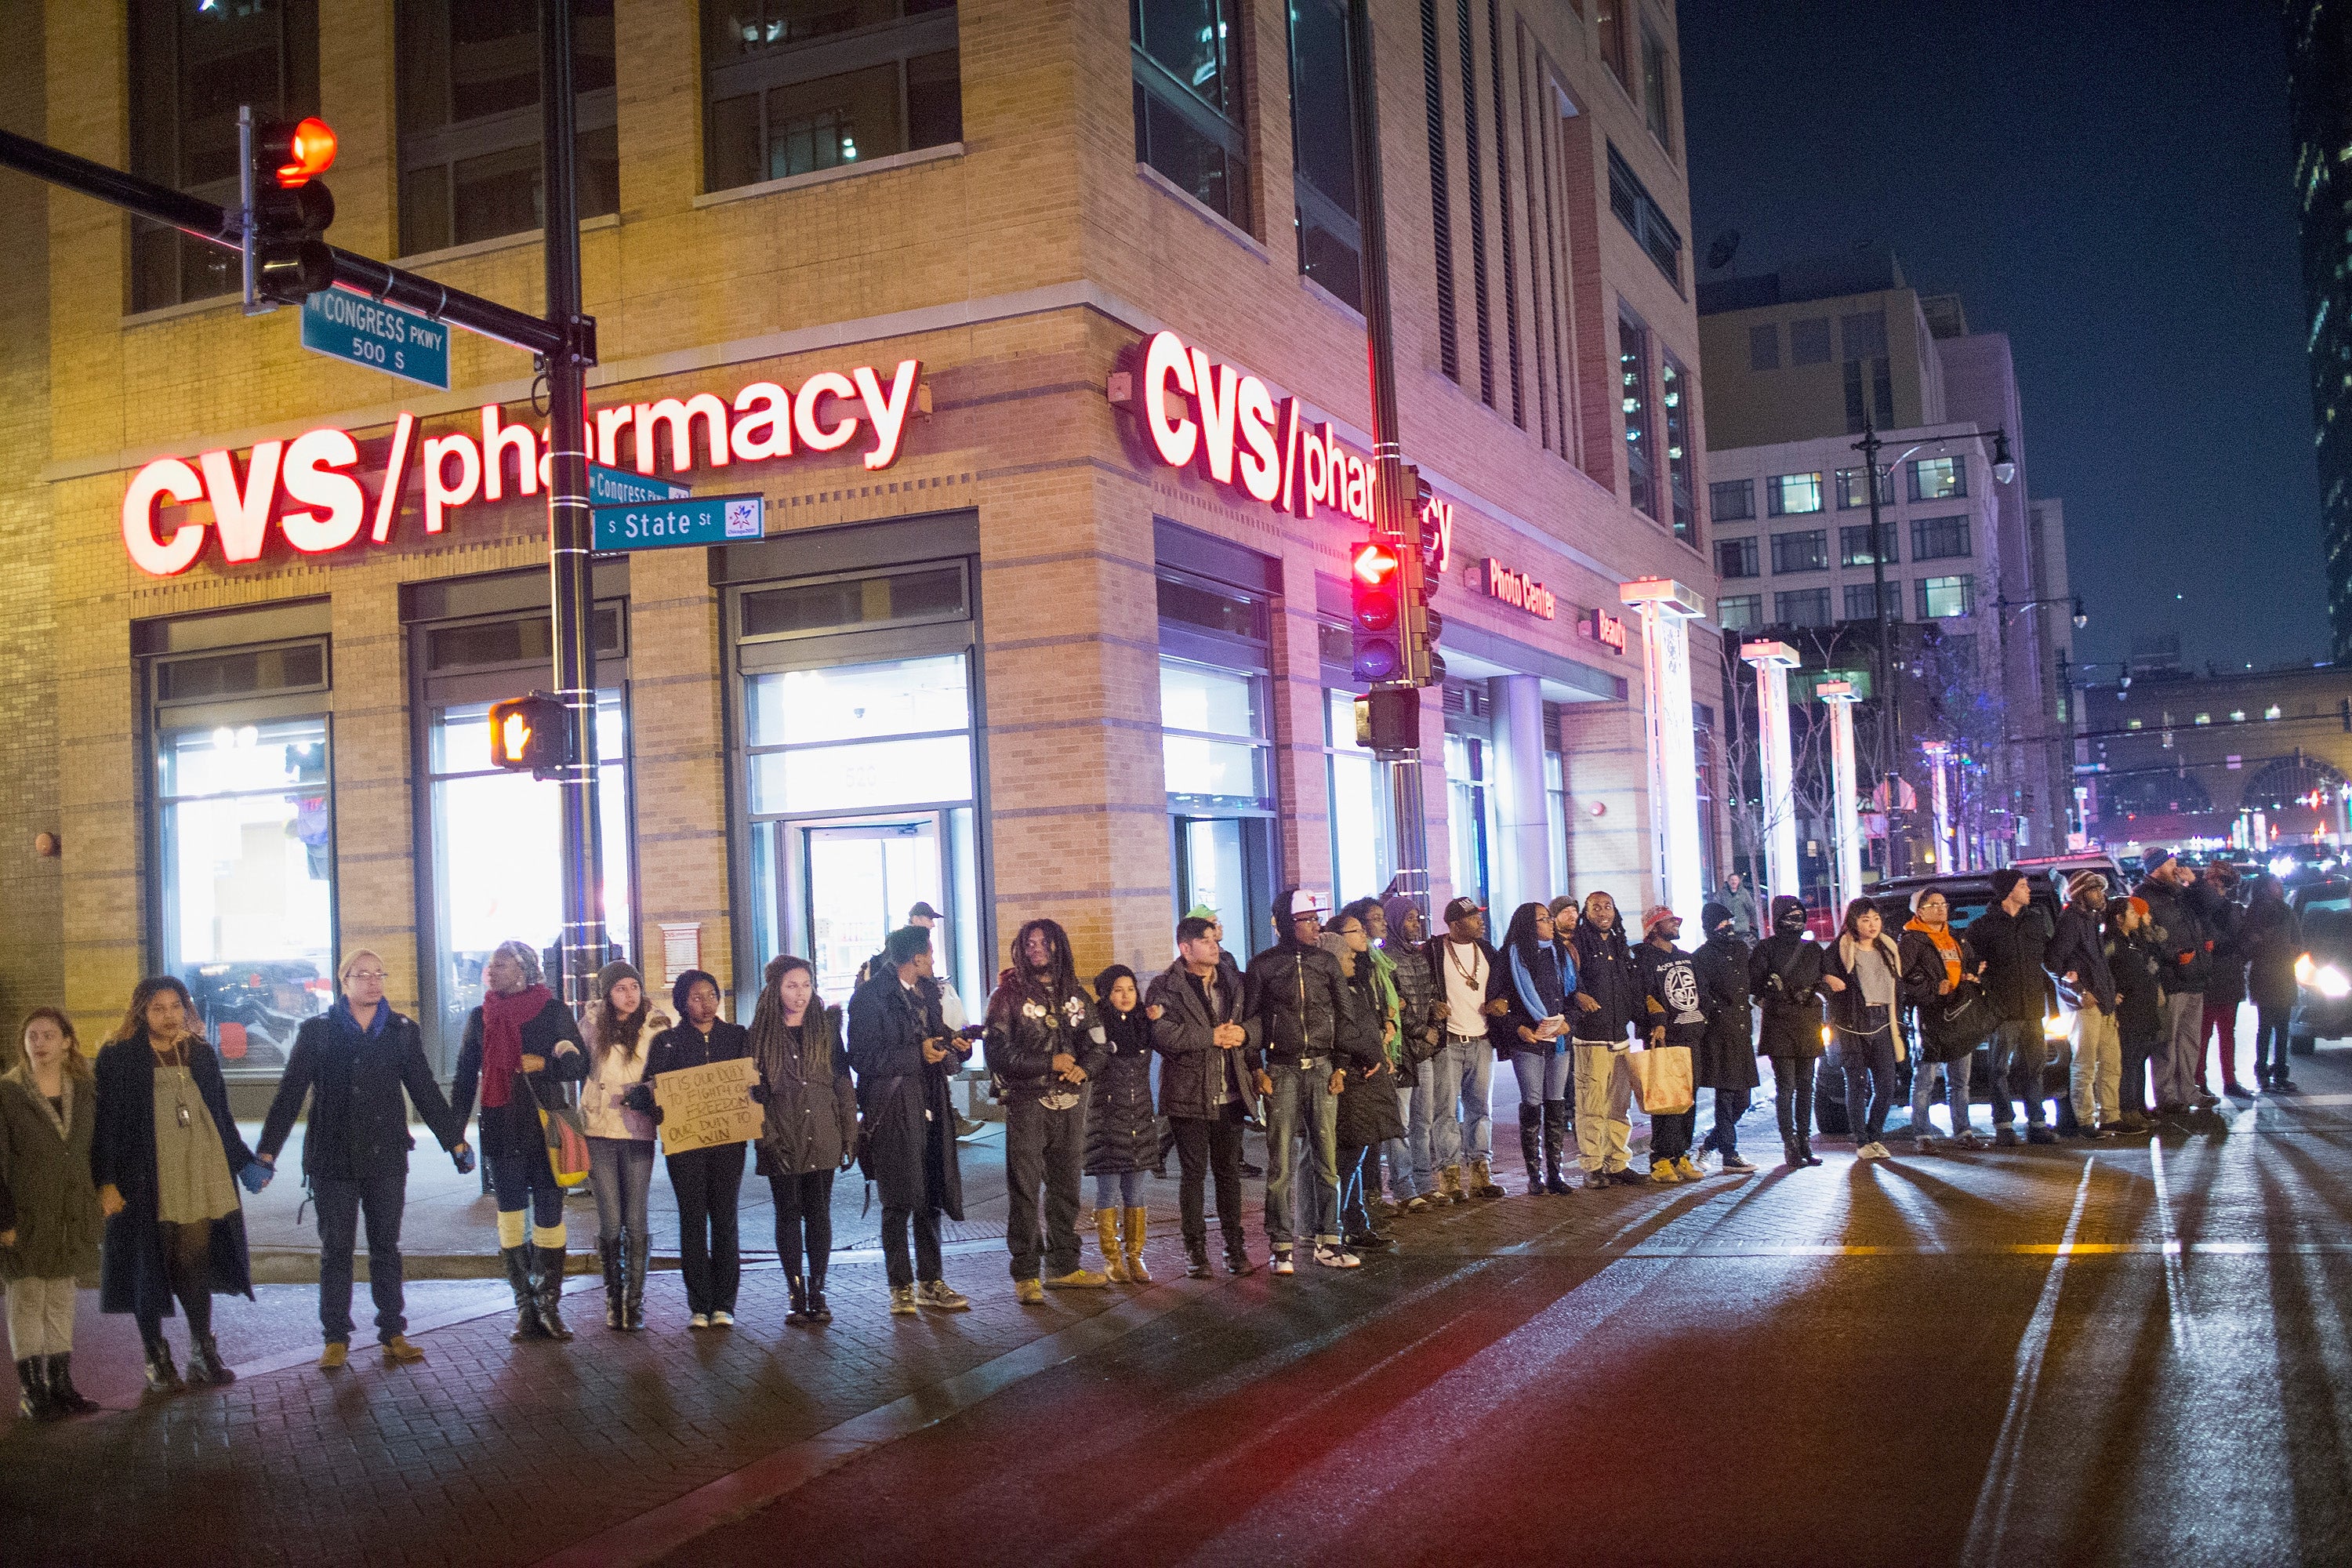 PHOTOS: Moving Images From the Laquan McDonald Protests in Chicago